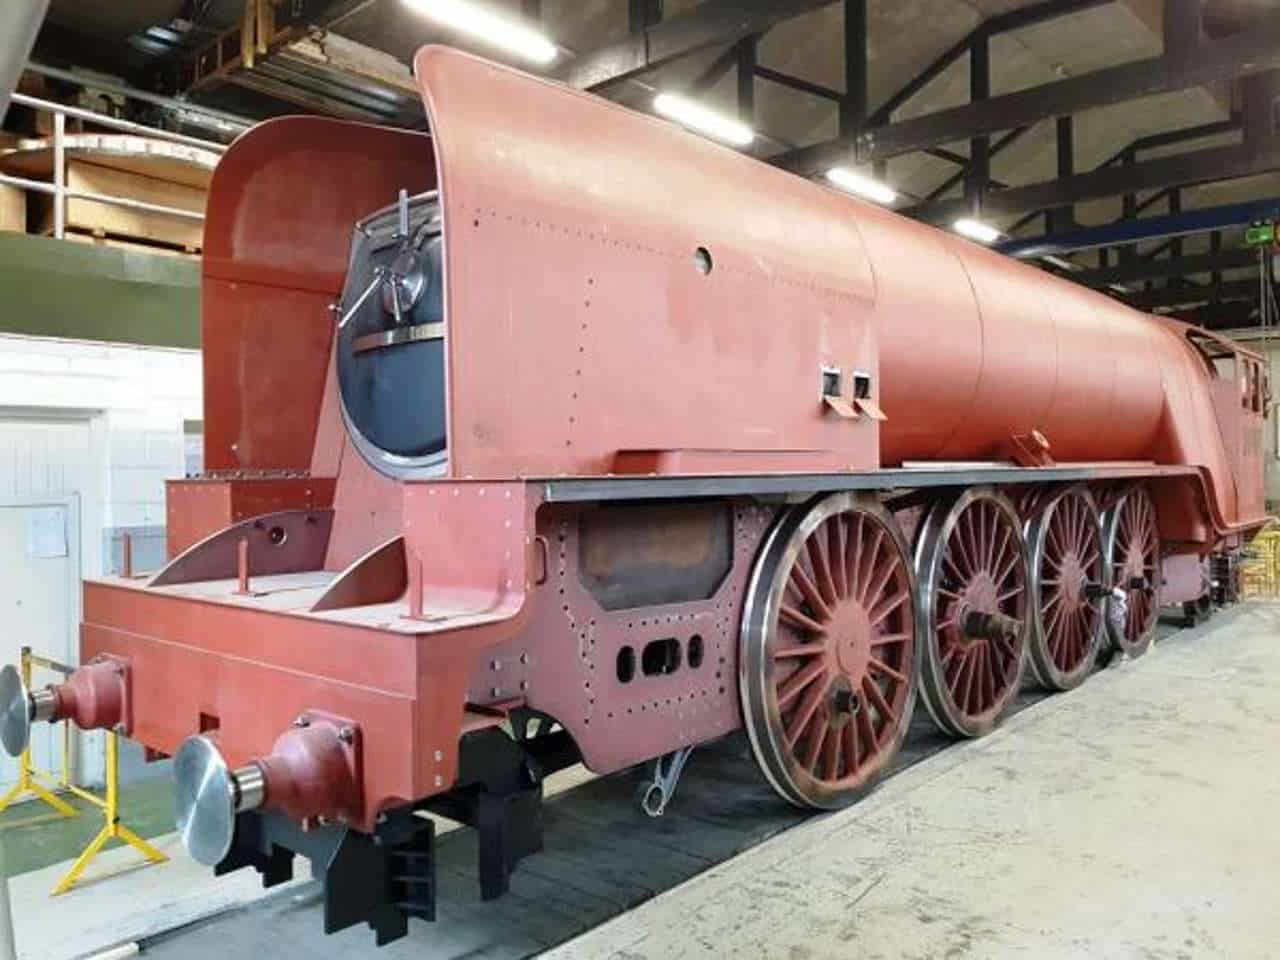 p2-steam-locomotive-progress-to-be-shared-at-special-roadshows-in-2020